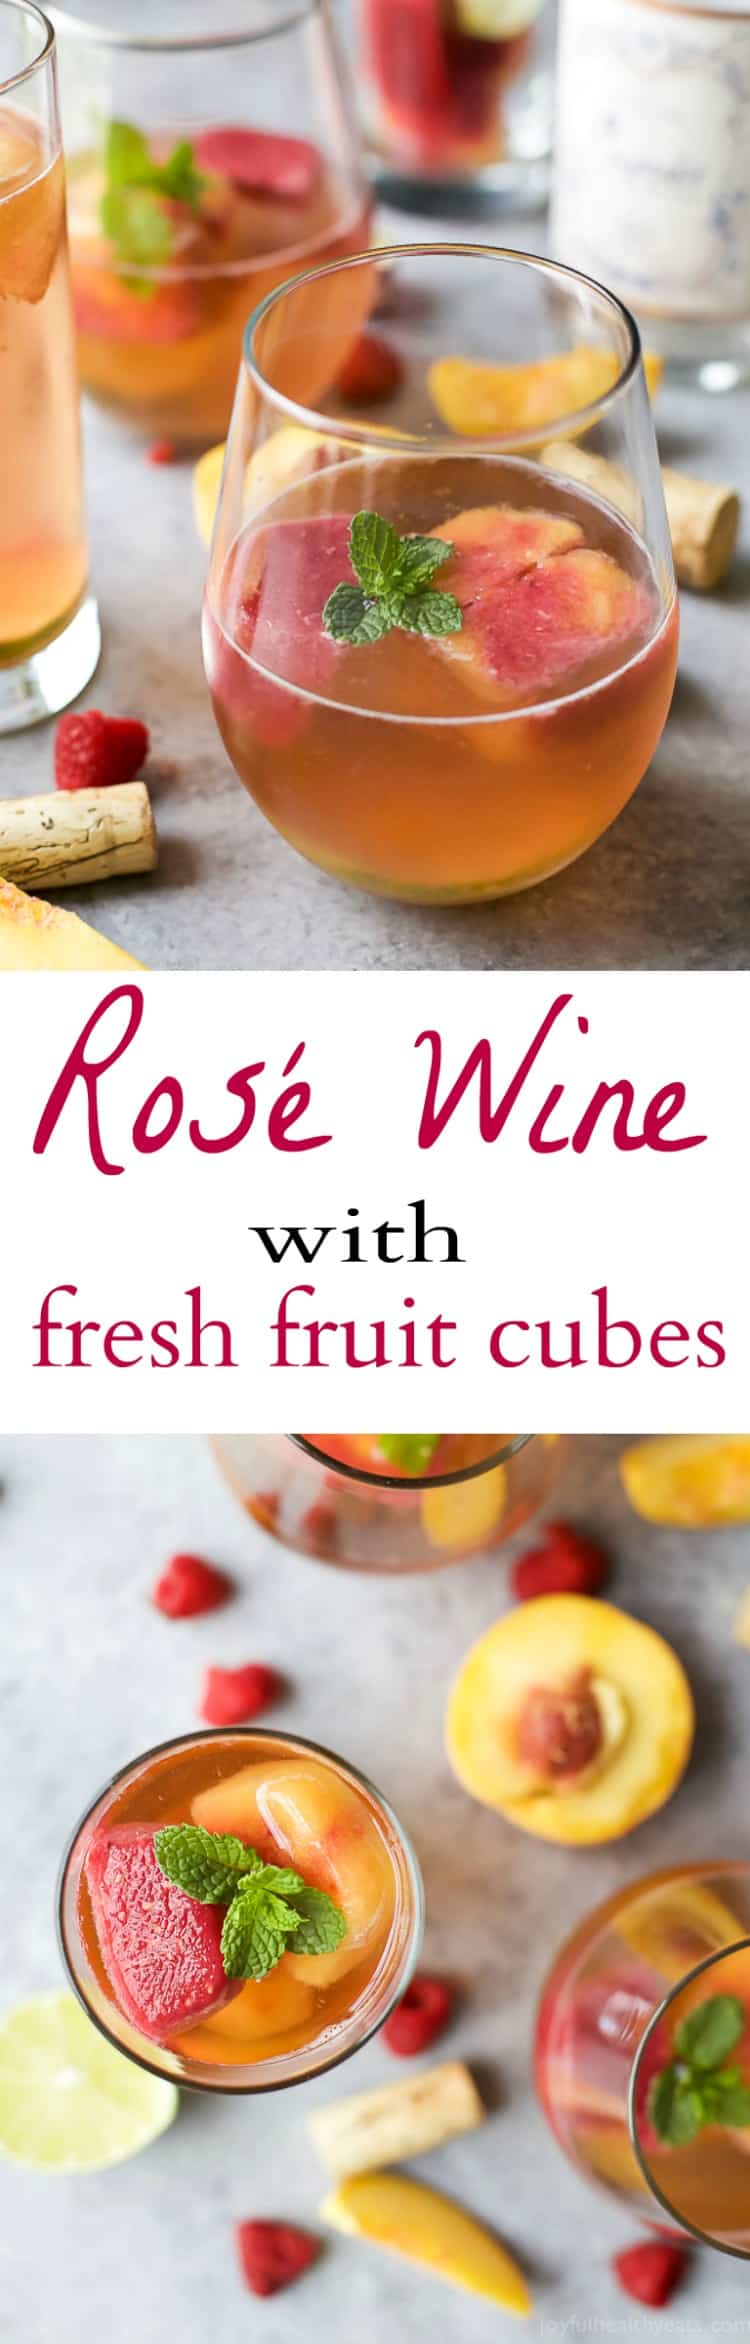 Rosé Wine with Homemade Fresh Fruit Cubes made with raspberries and peach - a perfect refreshing cocktail for the summer!